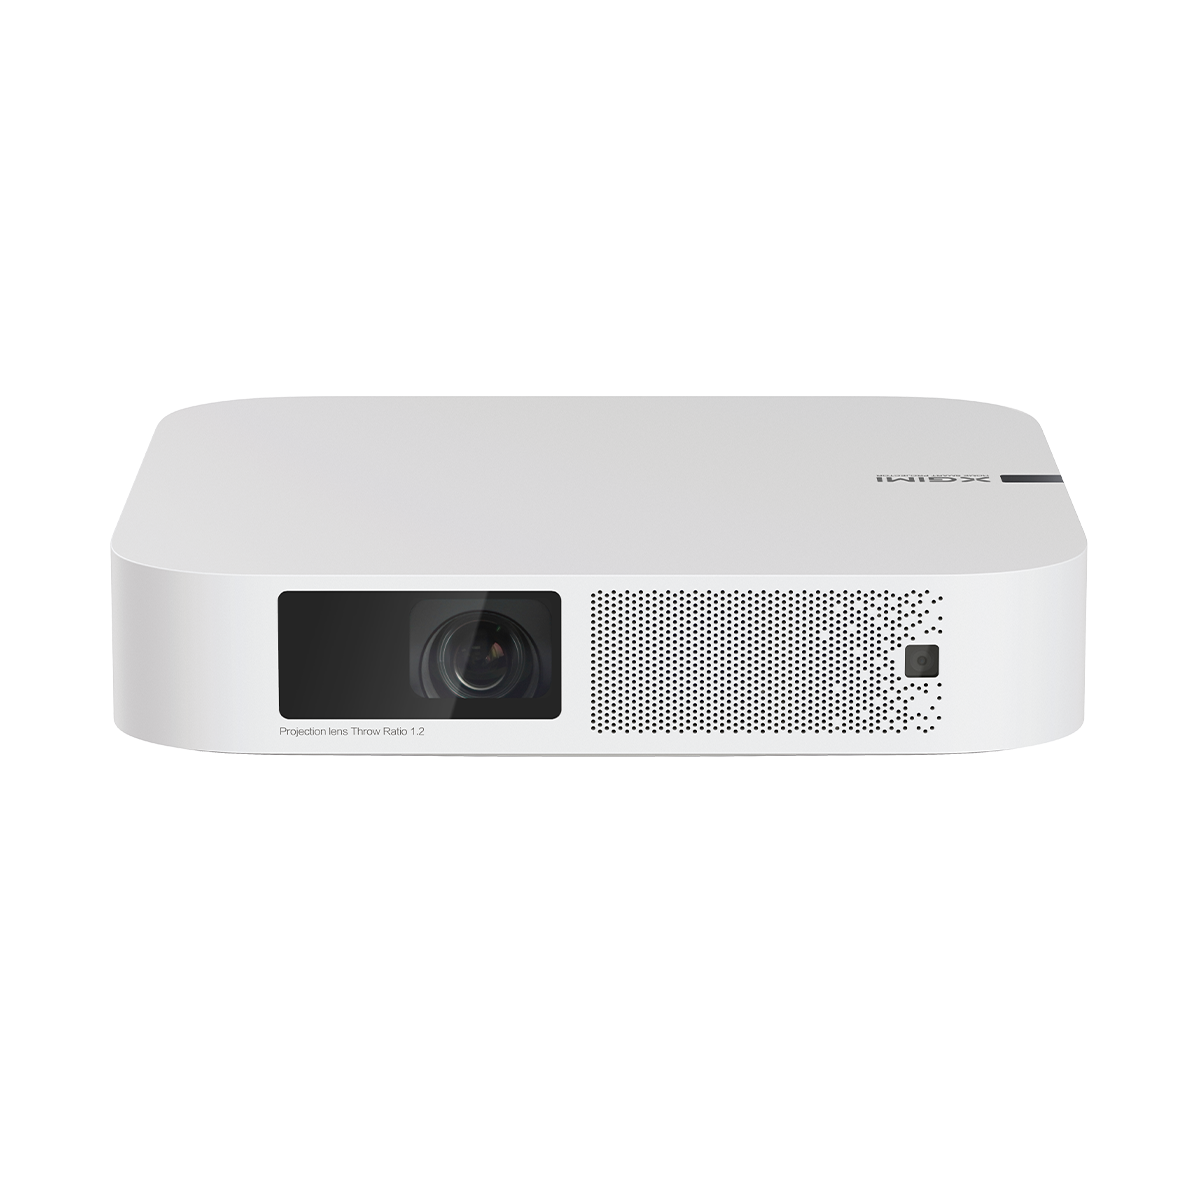 Comparing A Home Projector And A Portable Projector
— XGIMI Elfin vs. XGIMI Halo+ 